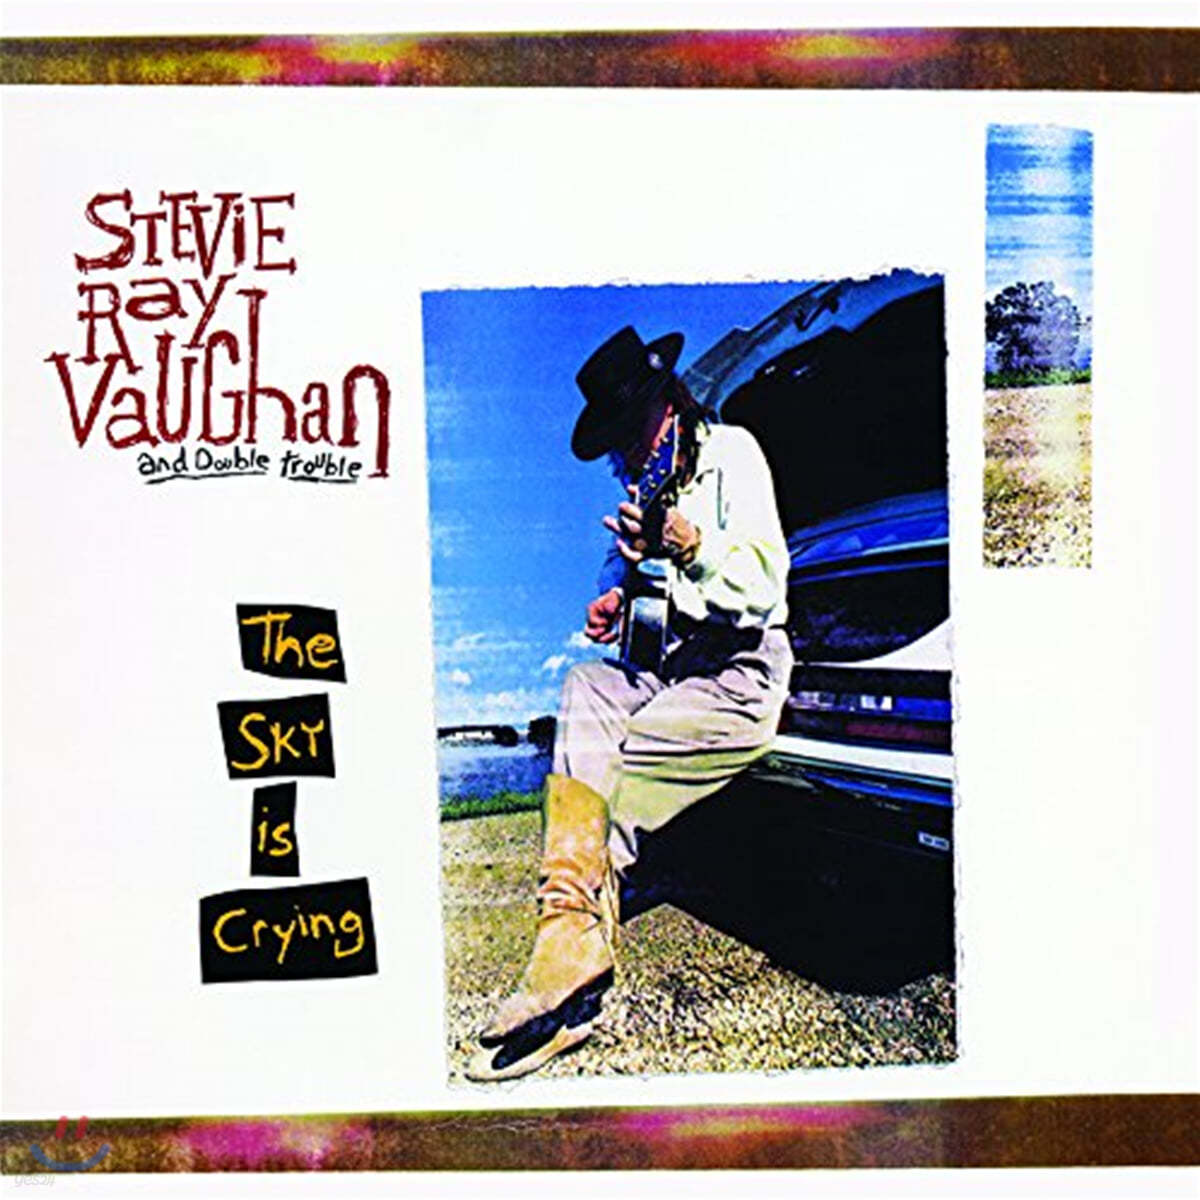 Stevie Ray Vaughan (스티비 레이 본) - The Sky Is Crying [2LP]